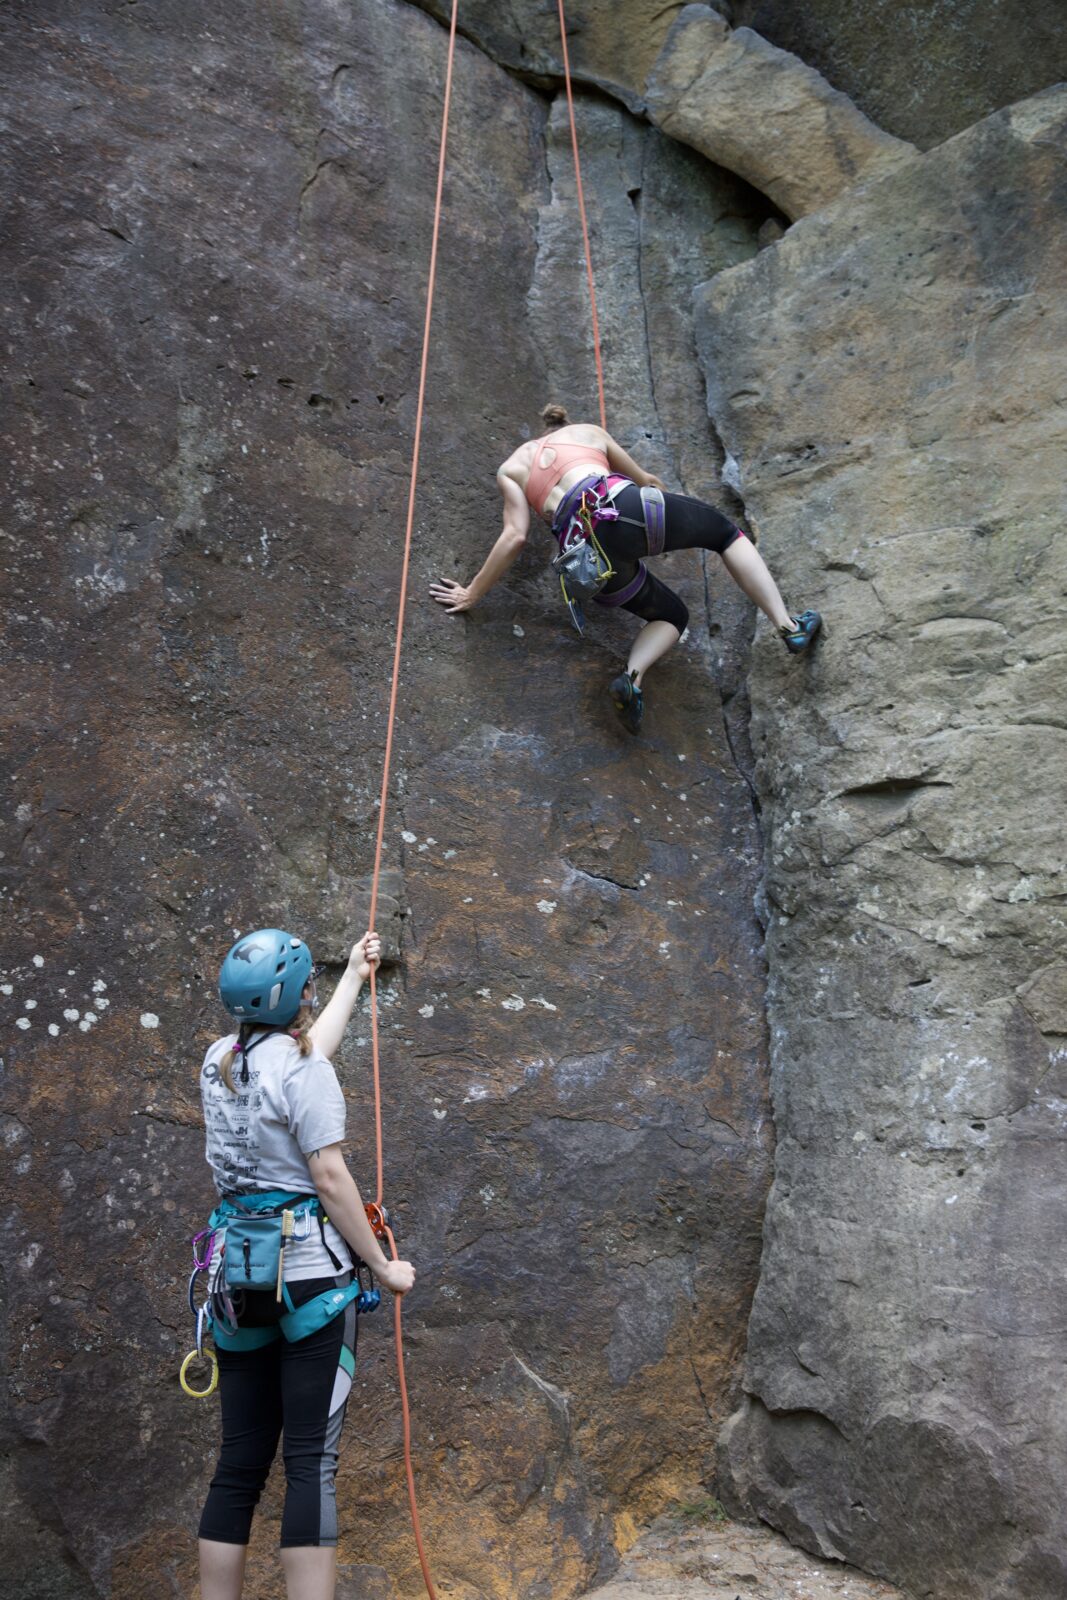 Climbers tackle a rock face in the New River Gorge National Park, a popular destination for many outdoor activities. (Photograph by Carmen Gentile)